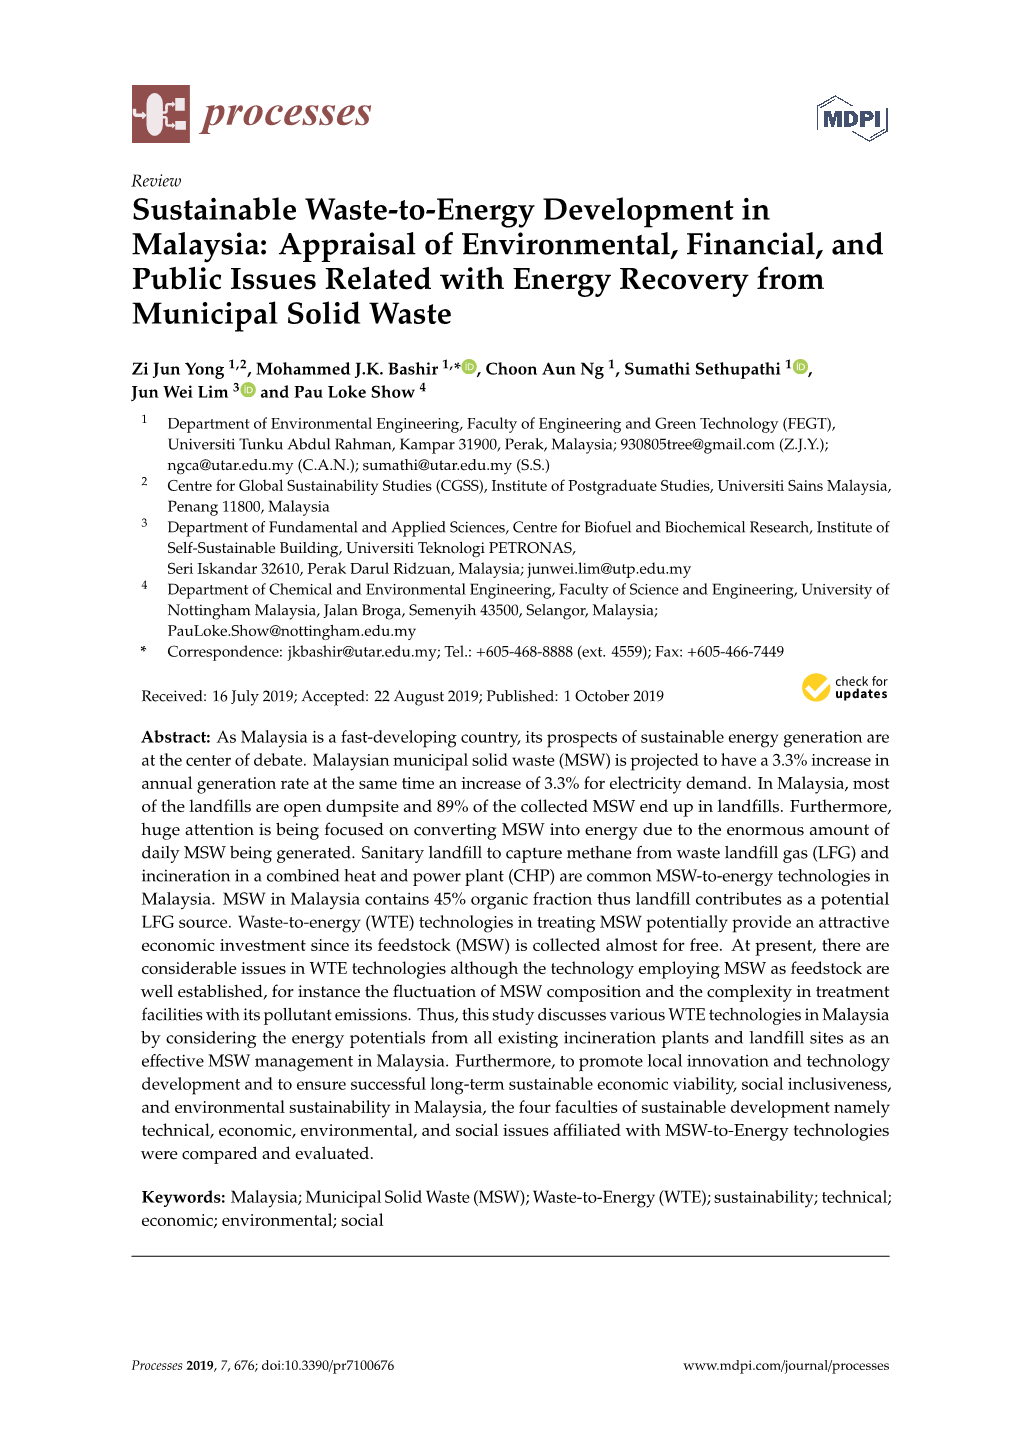 Sustainable Waste-To-Energy Development in Malaysia: Appraisal of Environmental, Financial, and Public Issues Related with Energy Recovery from Municipal Solid Waste